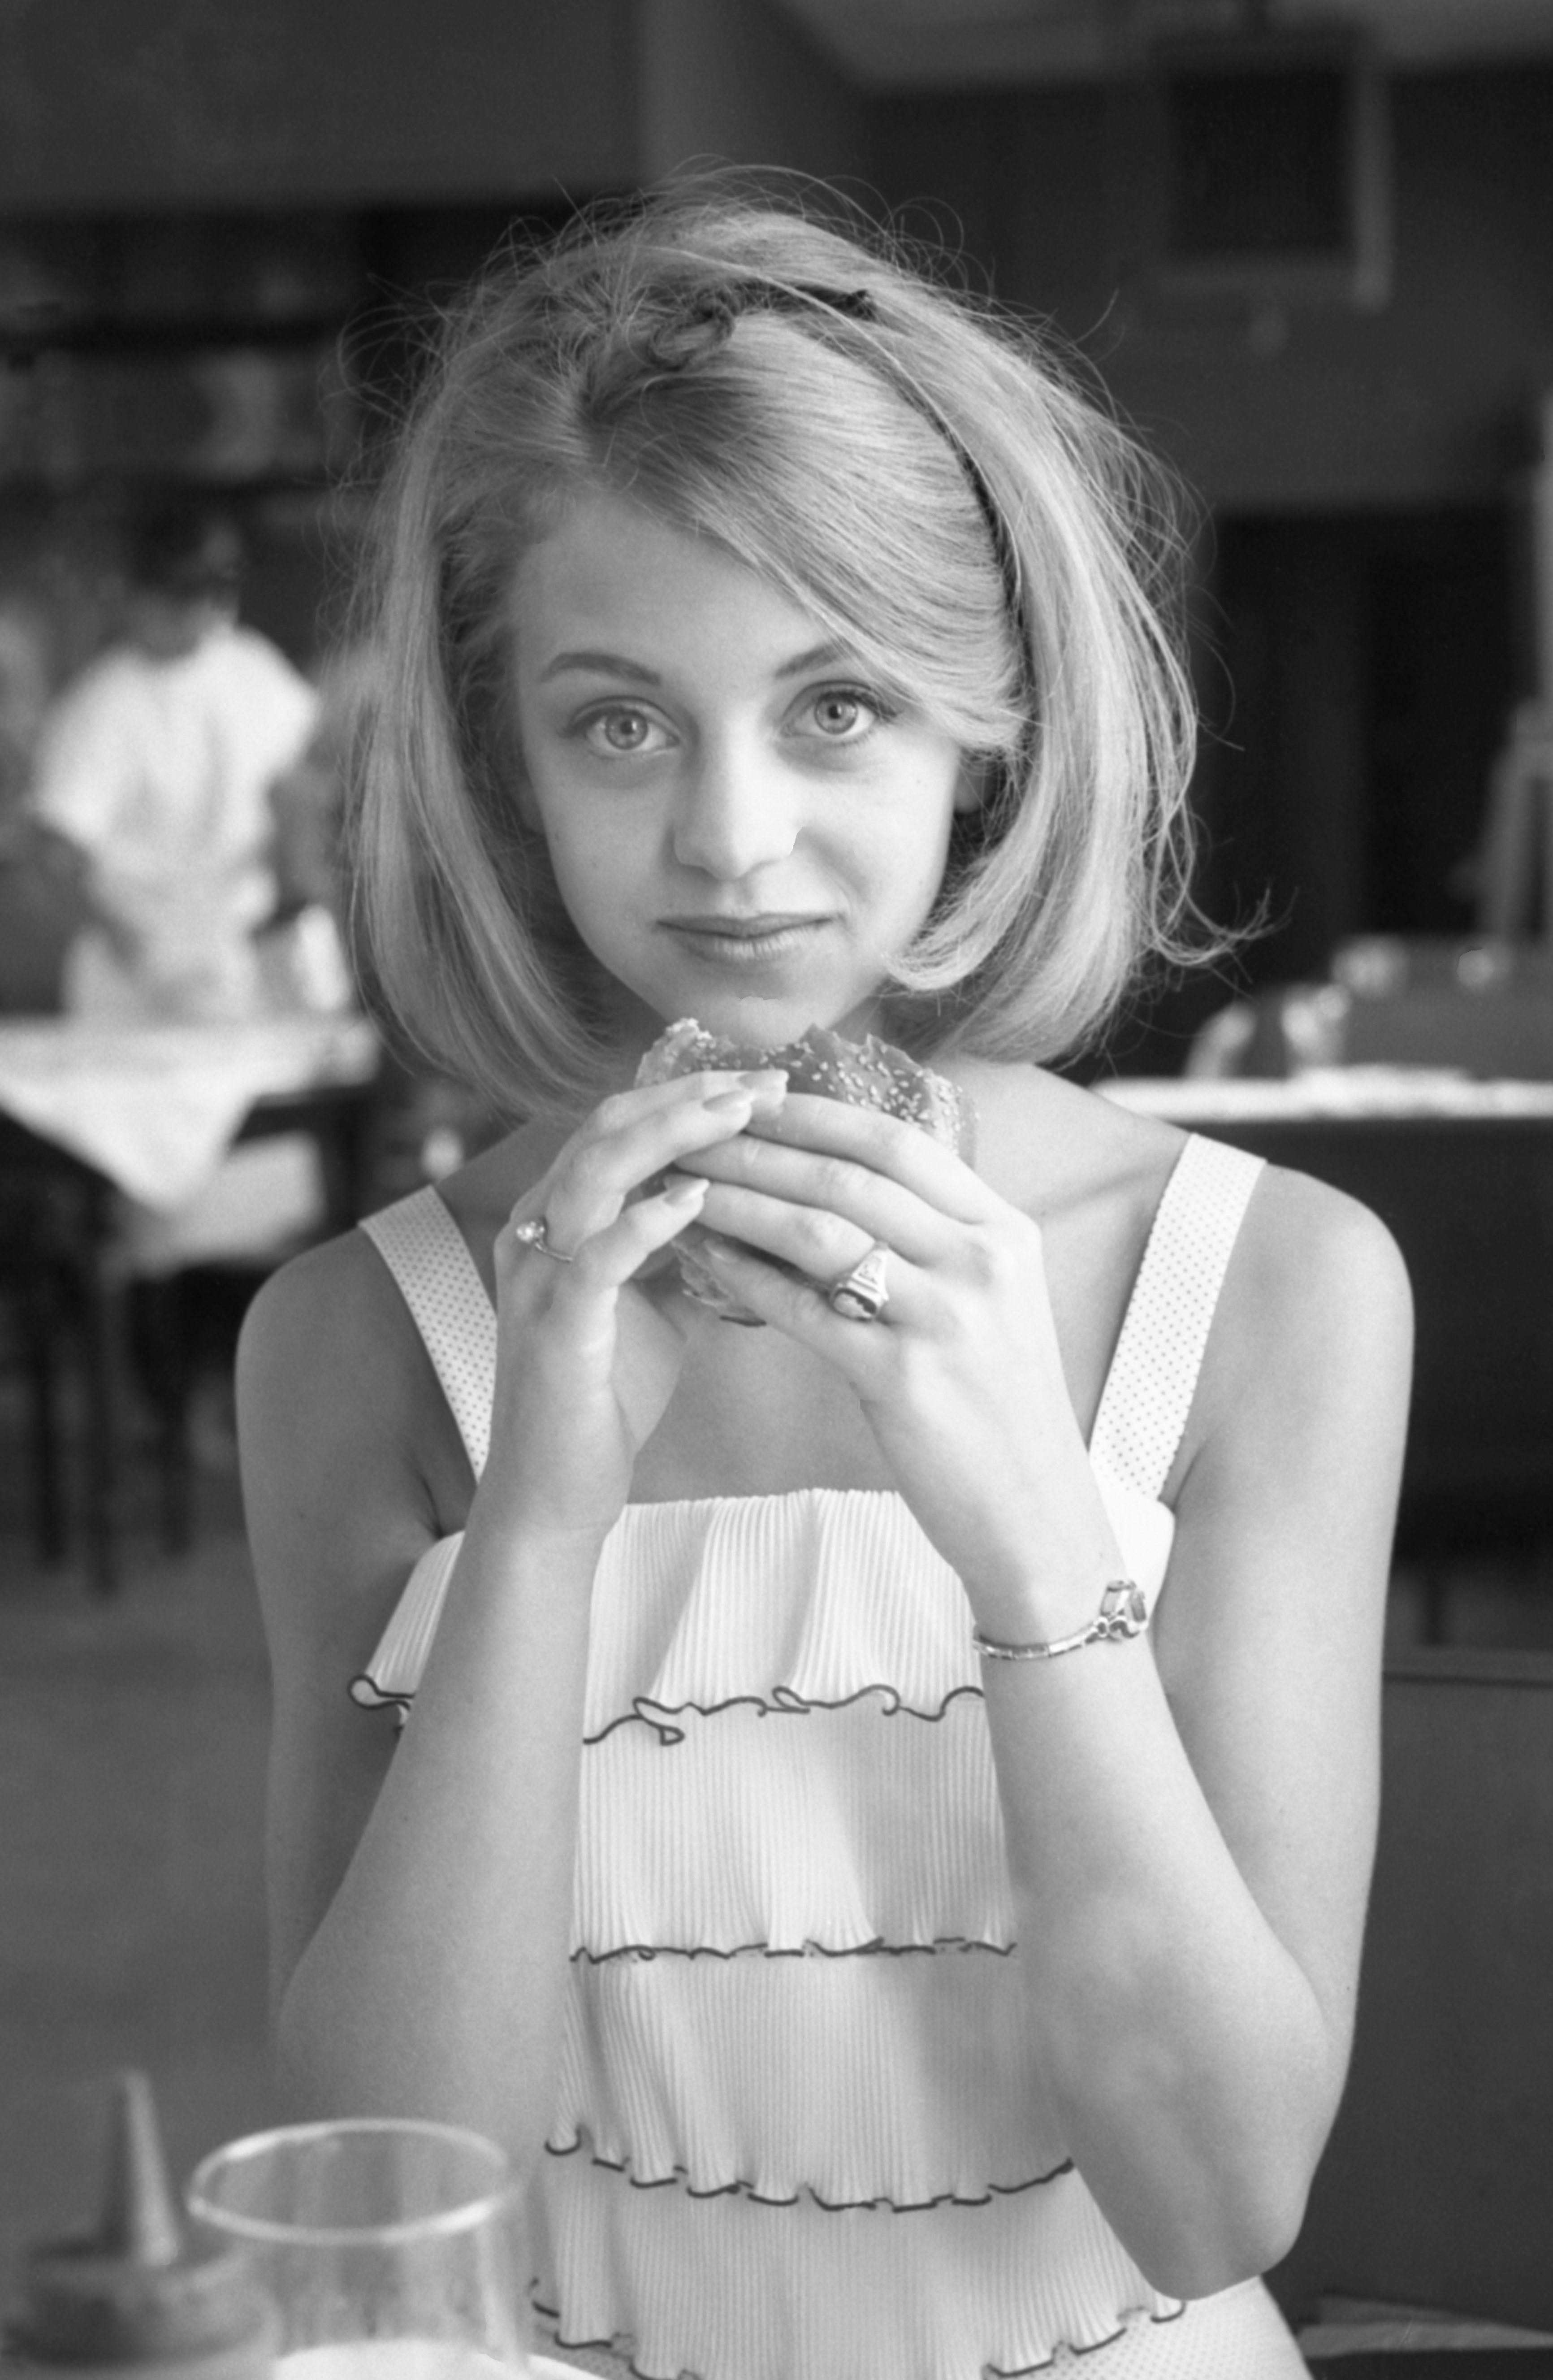 Goldie Hawn in Washington DC, 1964. | Source: Getty Images